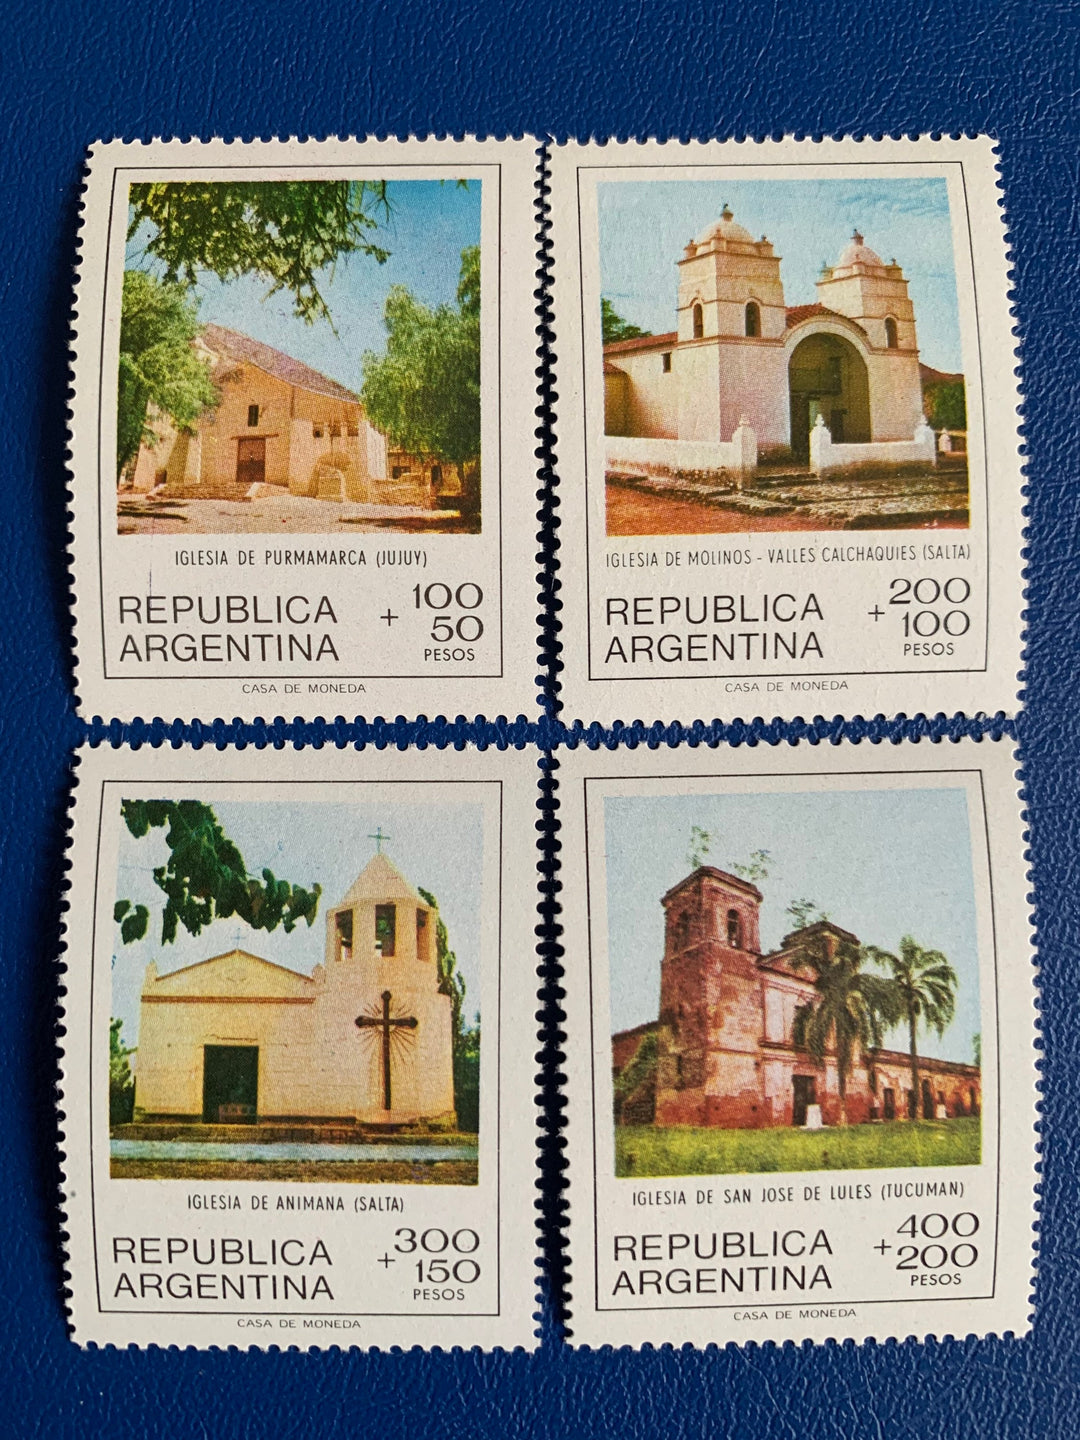 Argentina - Original Vintage Postage Stamps- 1979 Argentine Churches - for the collector, artist or crafter